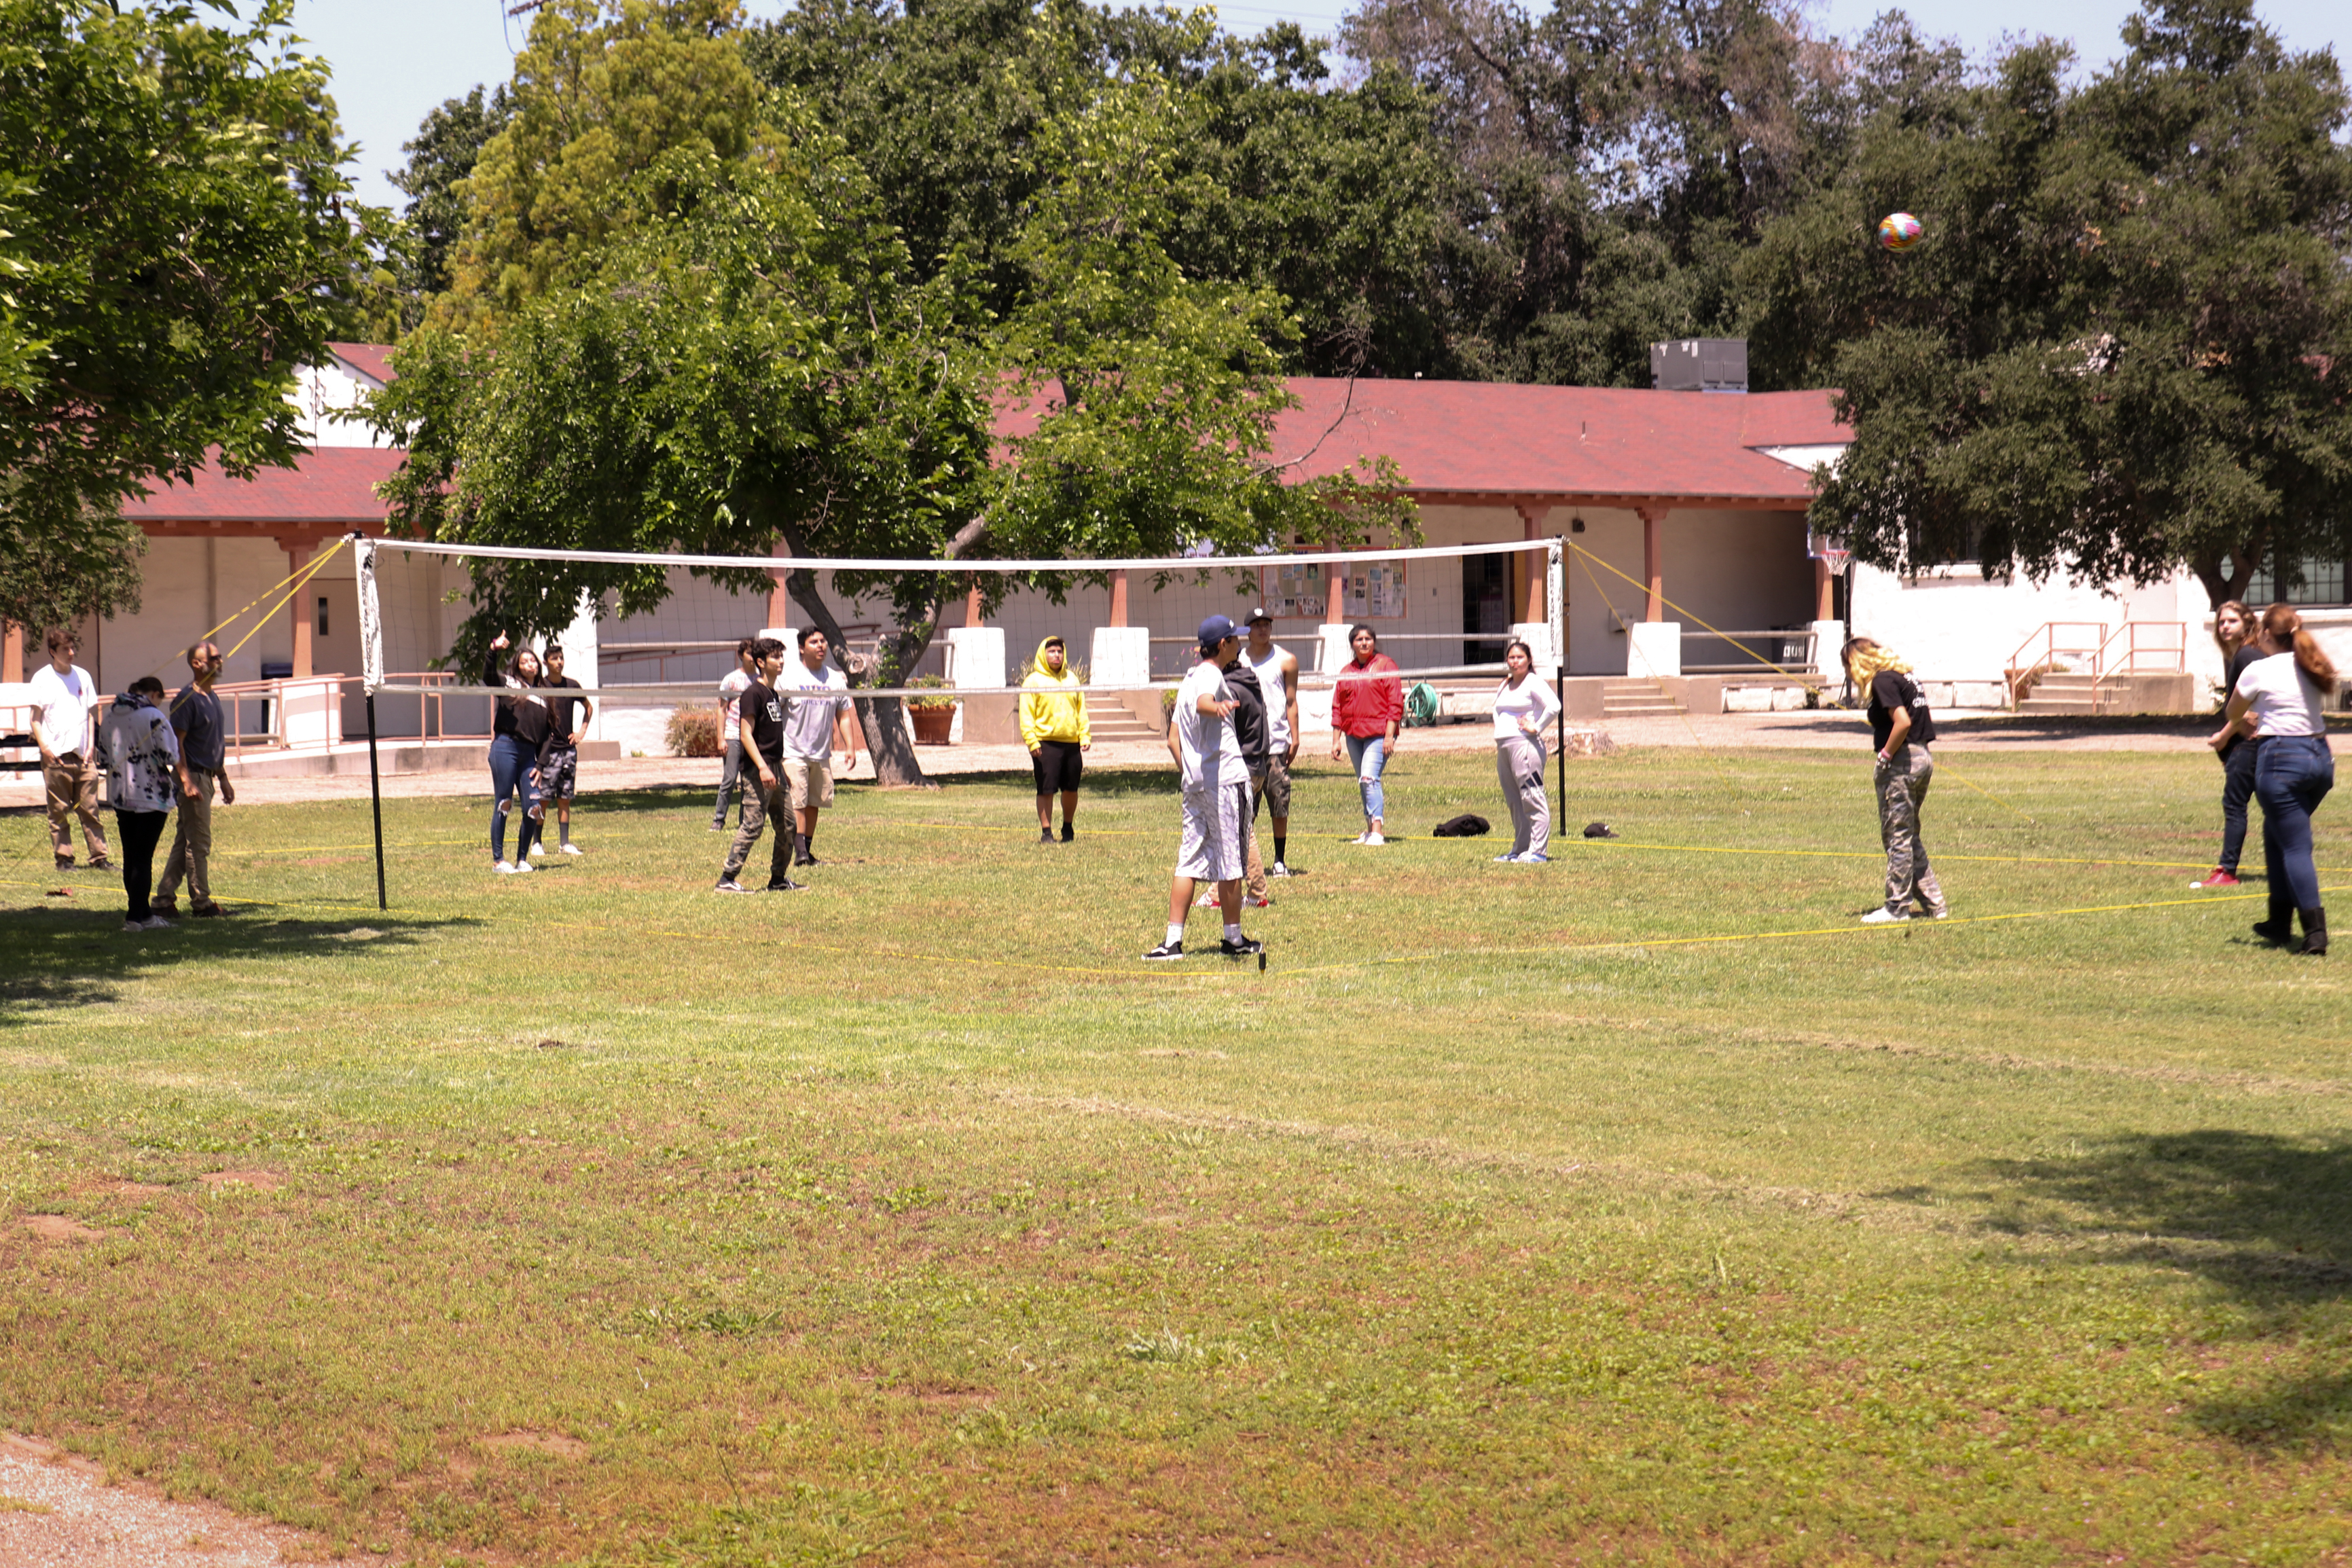 A group of teens all playing soccer in the school's field